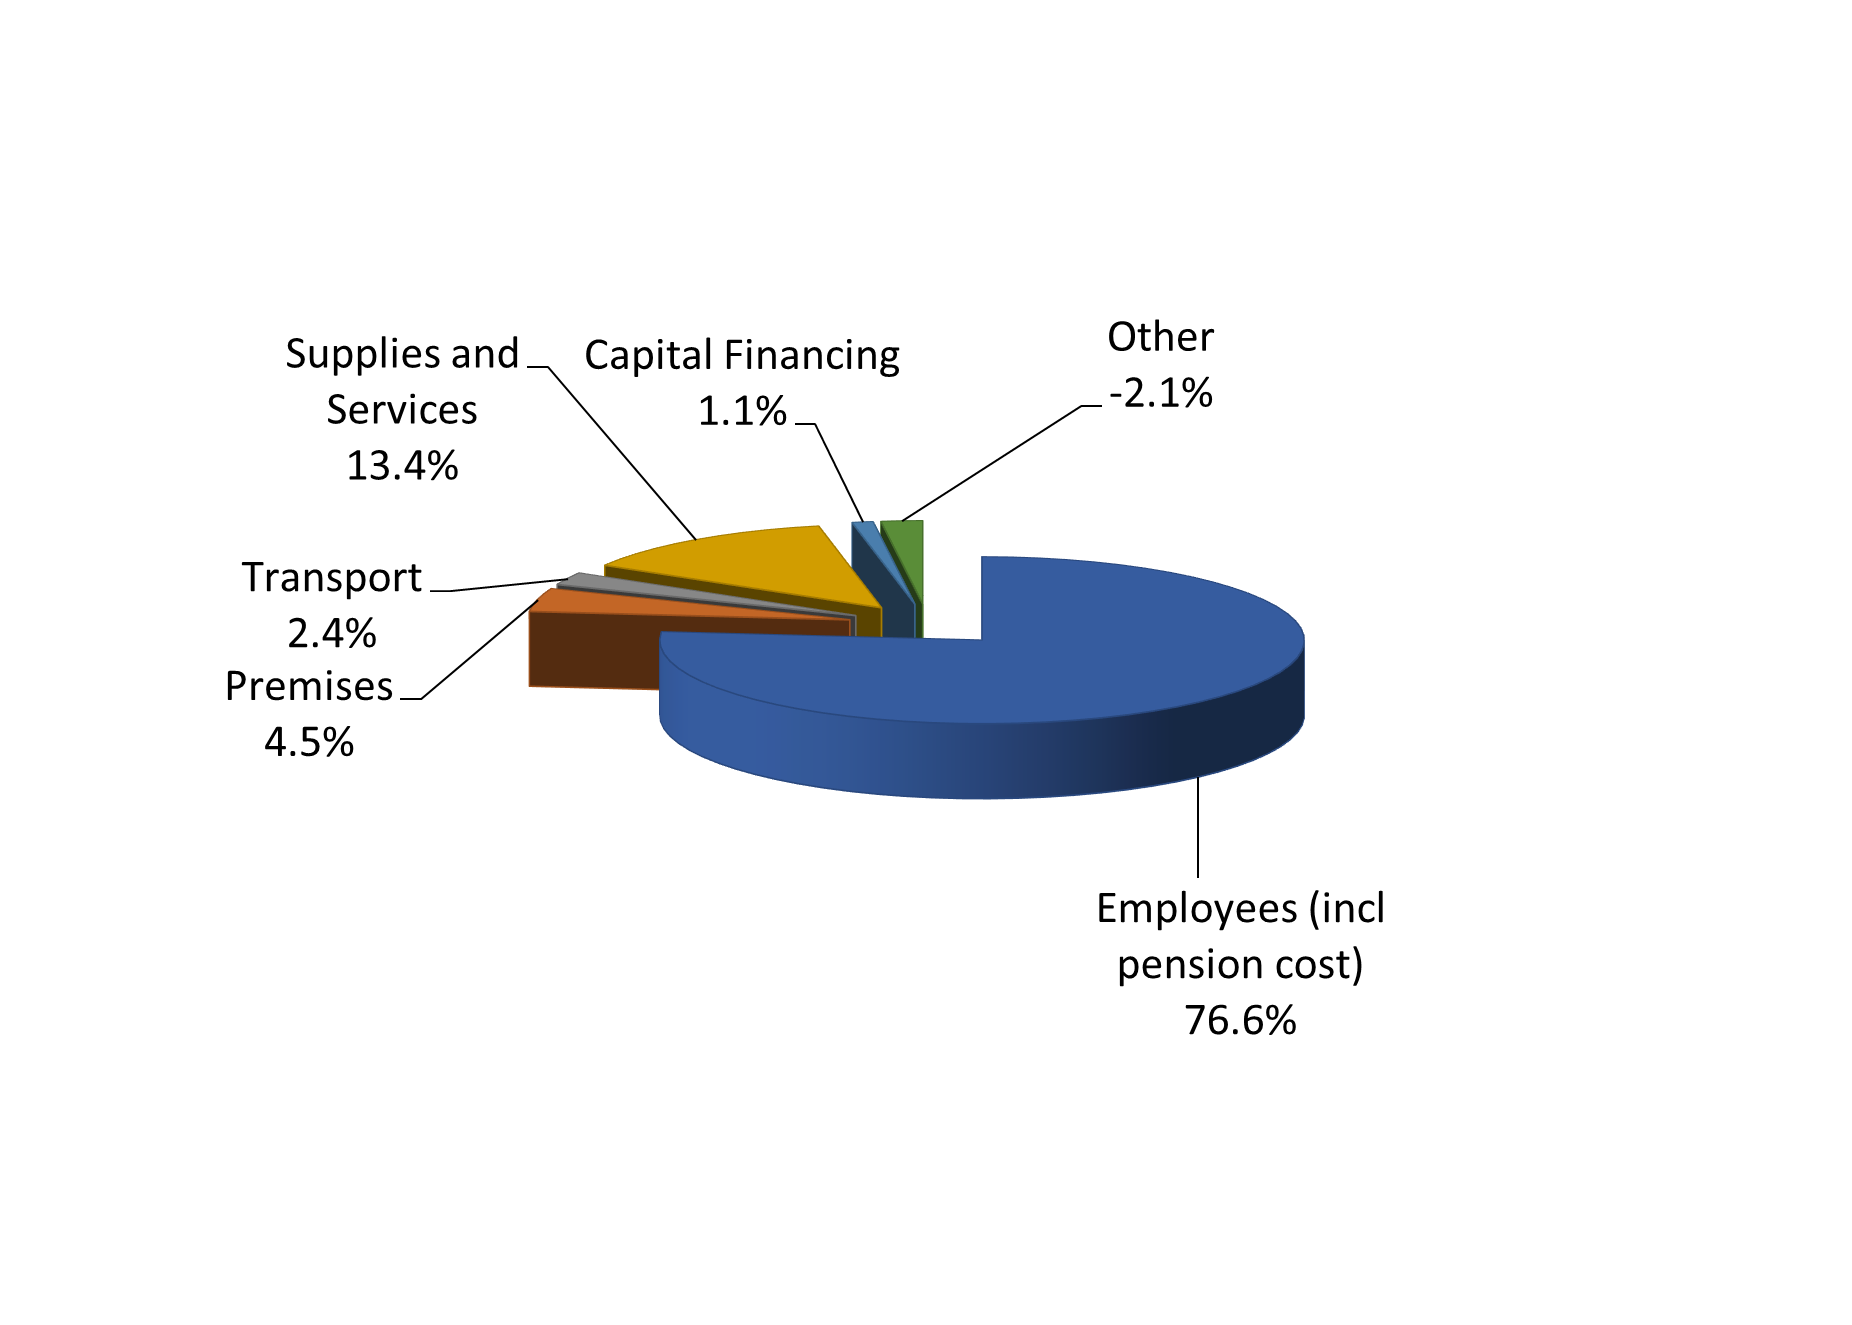 This pie chart demonstrates how the AF&RS net budget for 2024/25 is divided:

Employee costs (including pension cost): 76.6%
Supplies and Services: 13.4%
Premises: 4.5%
Transport: 2.4%
Capital Financing: 1.1%
Other: 2.1%